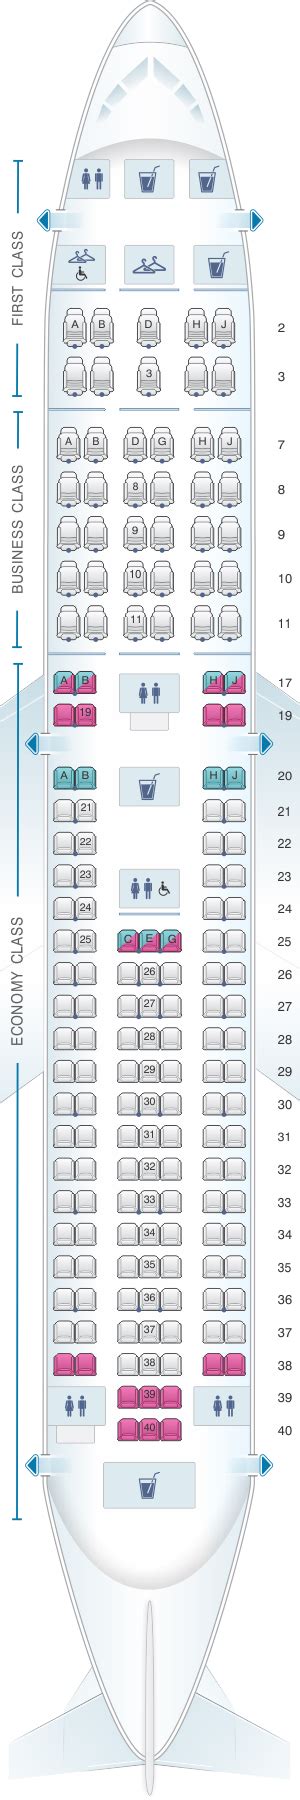 Boeing Seat Map American Airlines